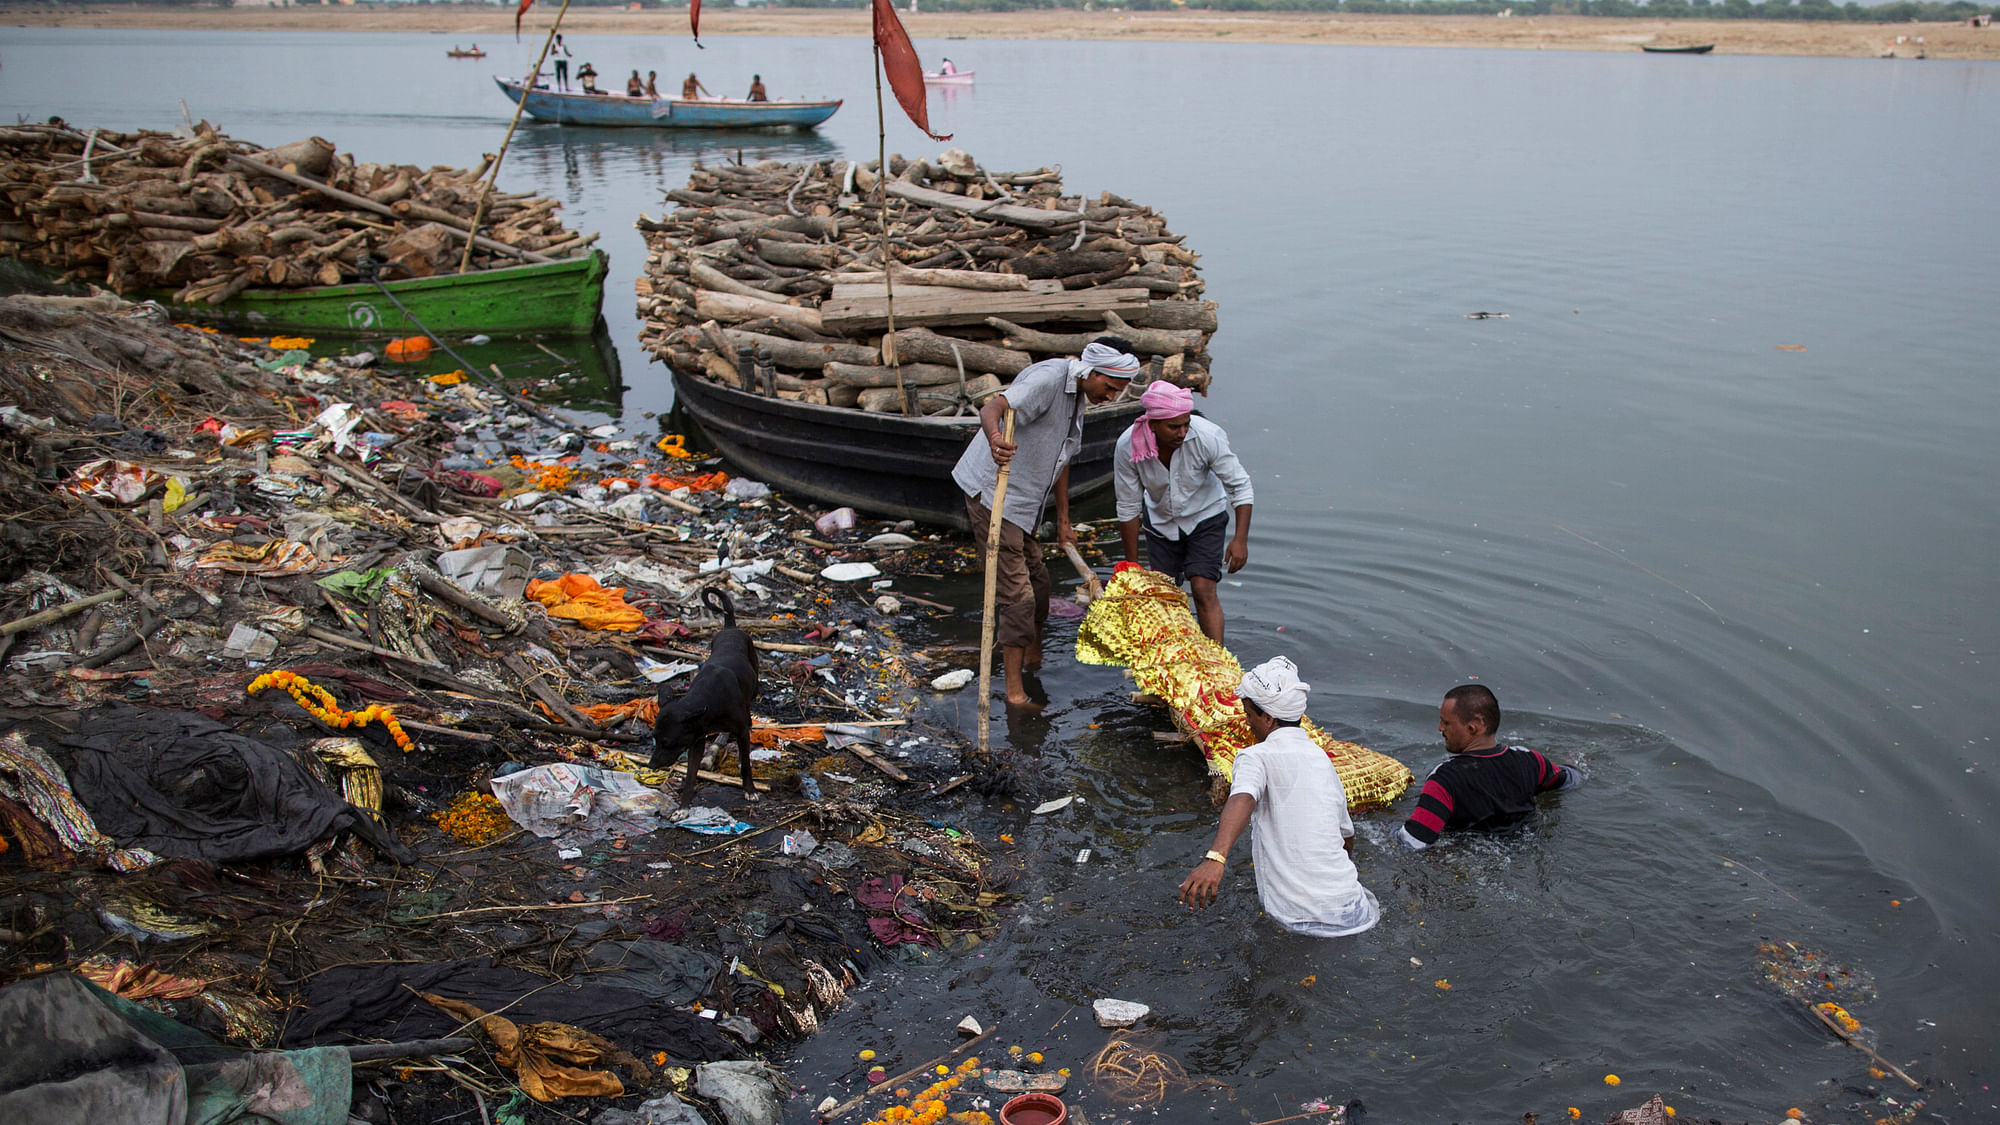 The polluted banks and waters of the river Ganga. Image used for representation.